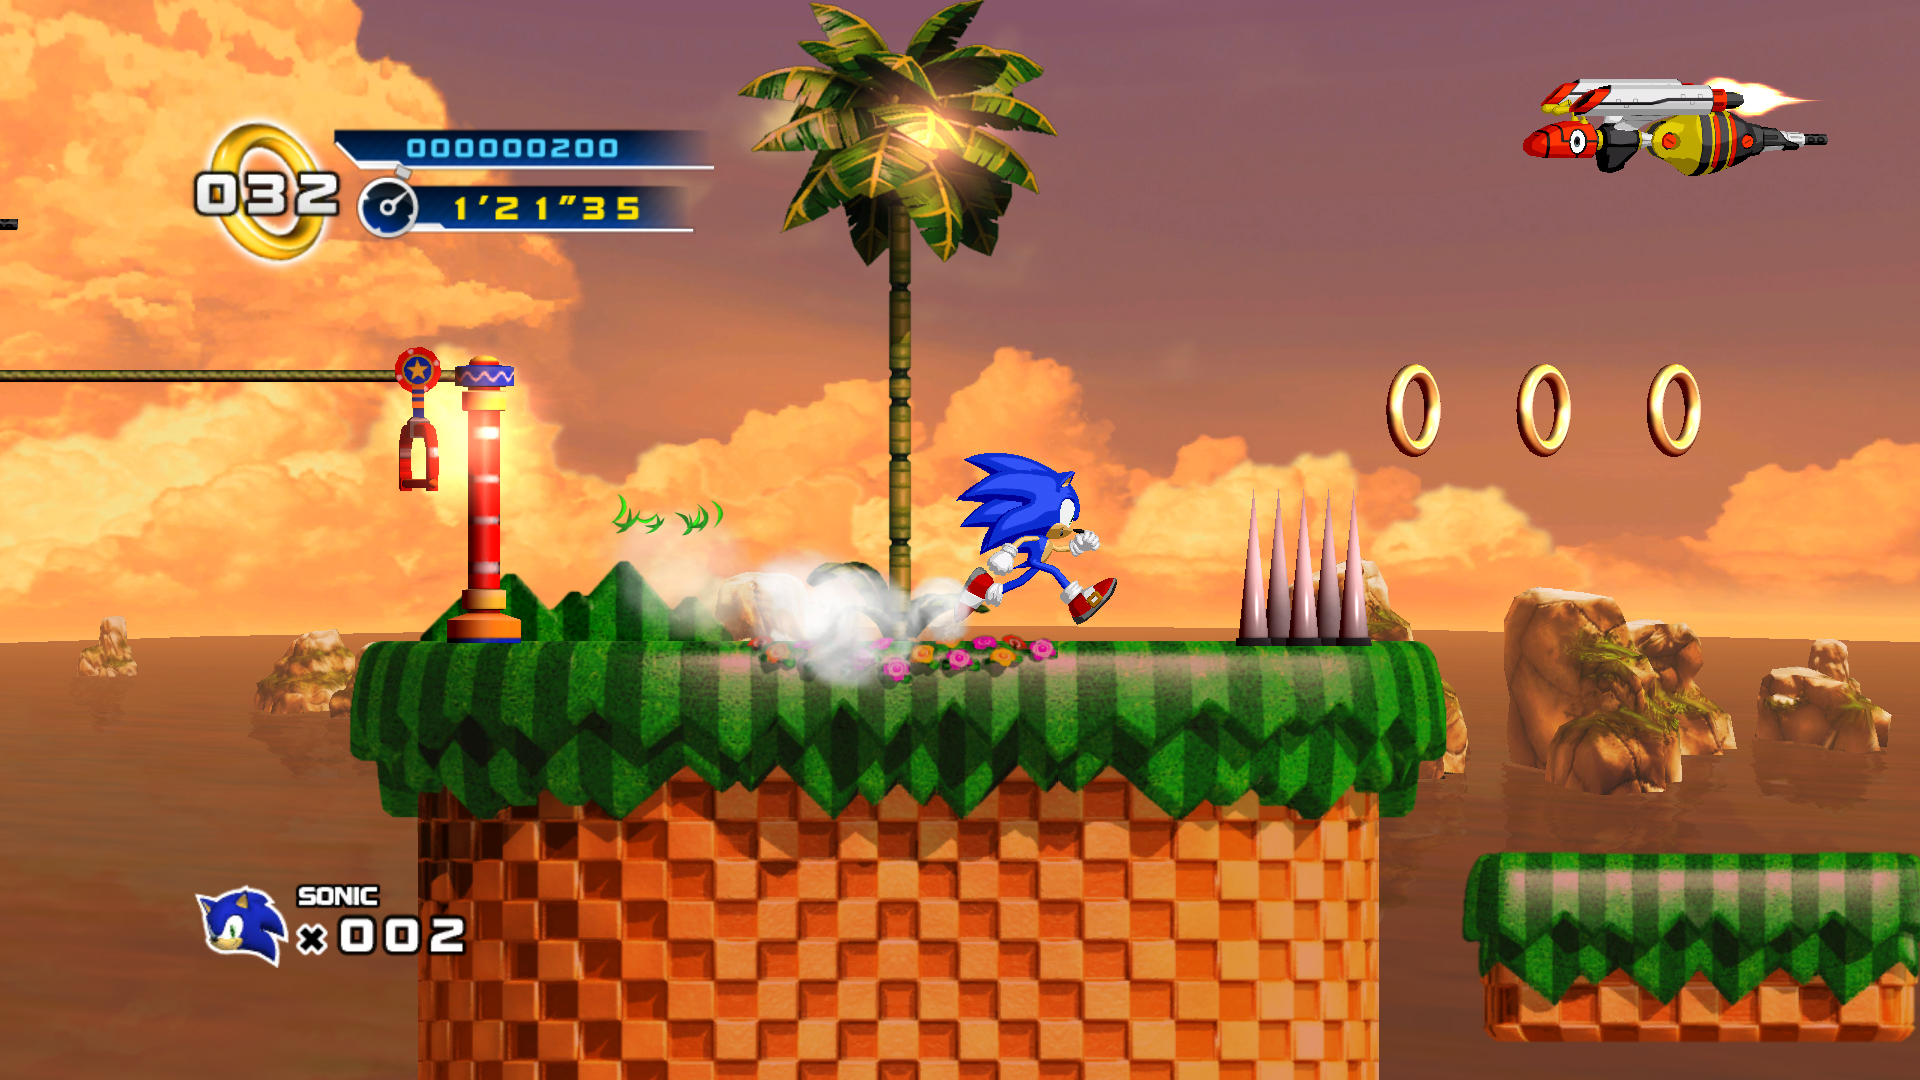 Download Sonic The Hedgehog 06 Pc